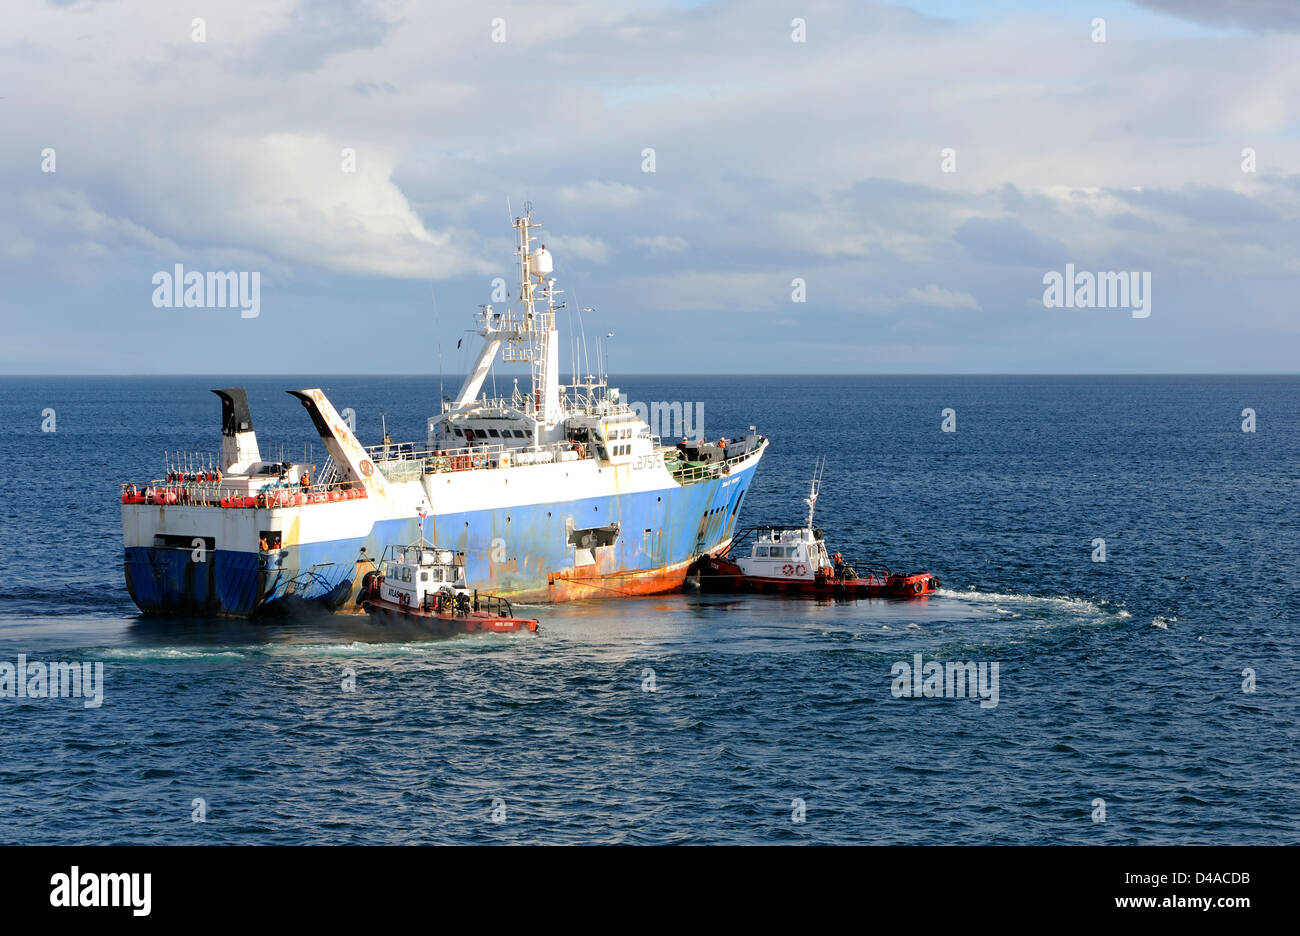 An ocean going fishing boat being manouvered by two tug boats in the  Strait of Magellan .  Punta Arenas, Chile. Stock Photo